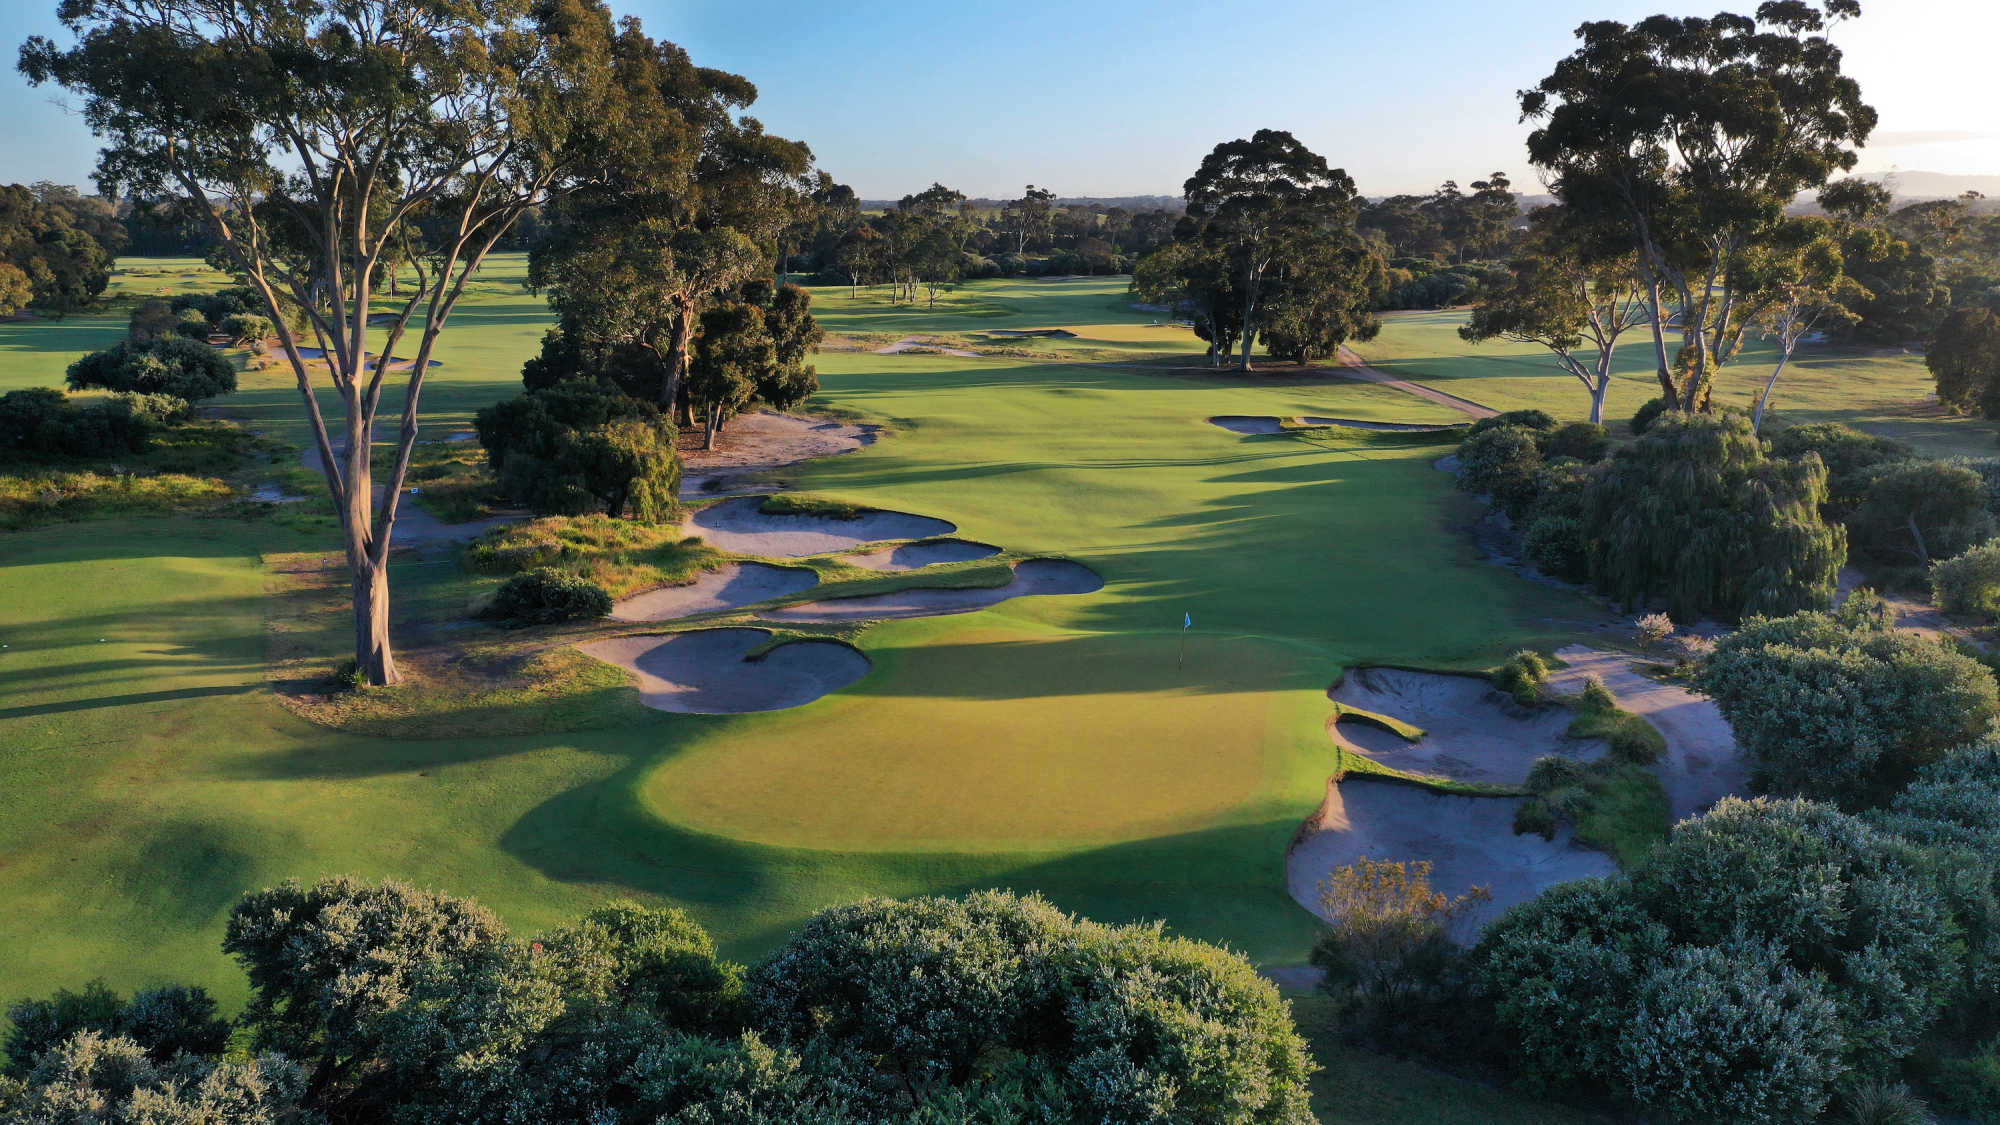 Kingston Heath will host the 2028 Presidents Cup